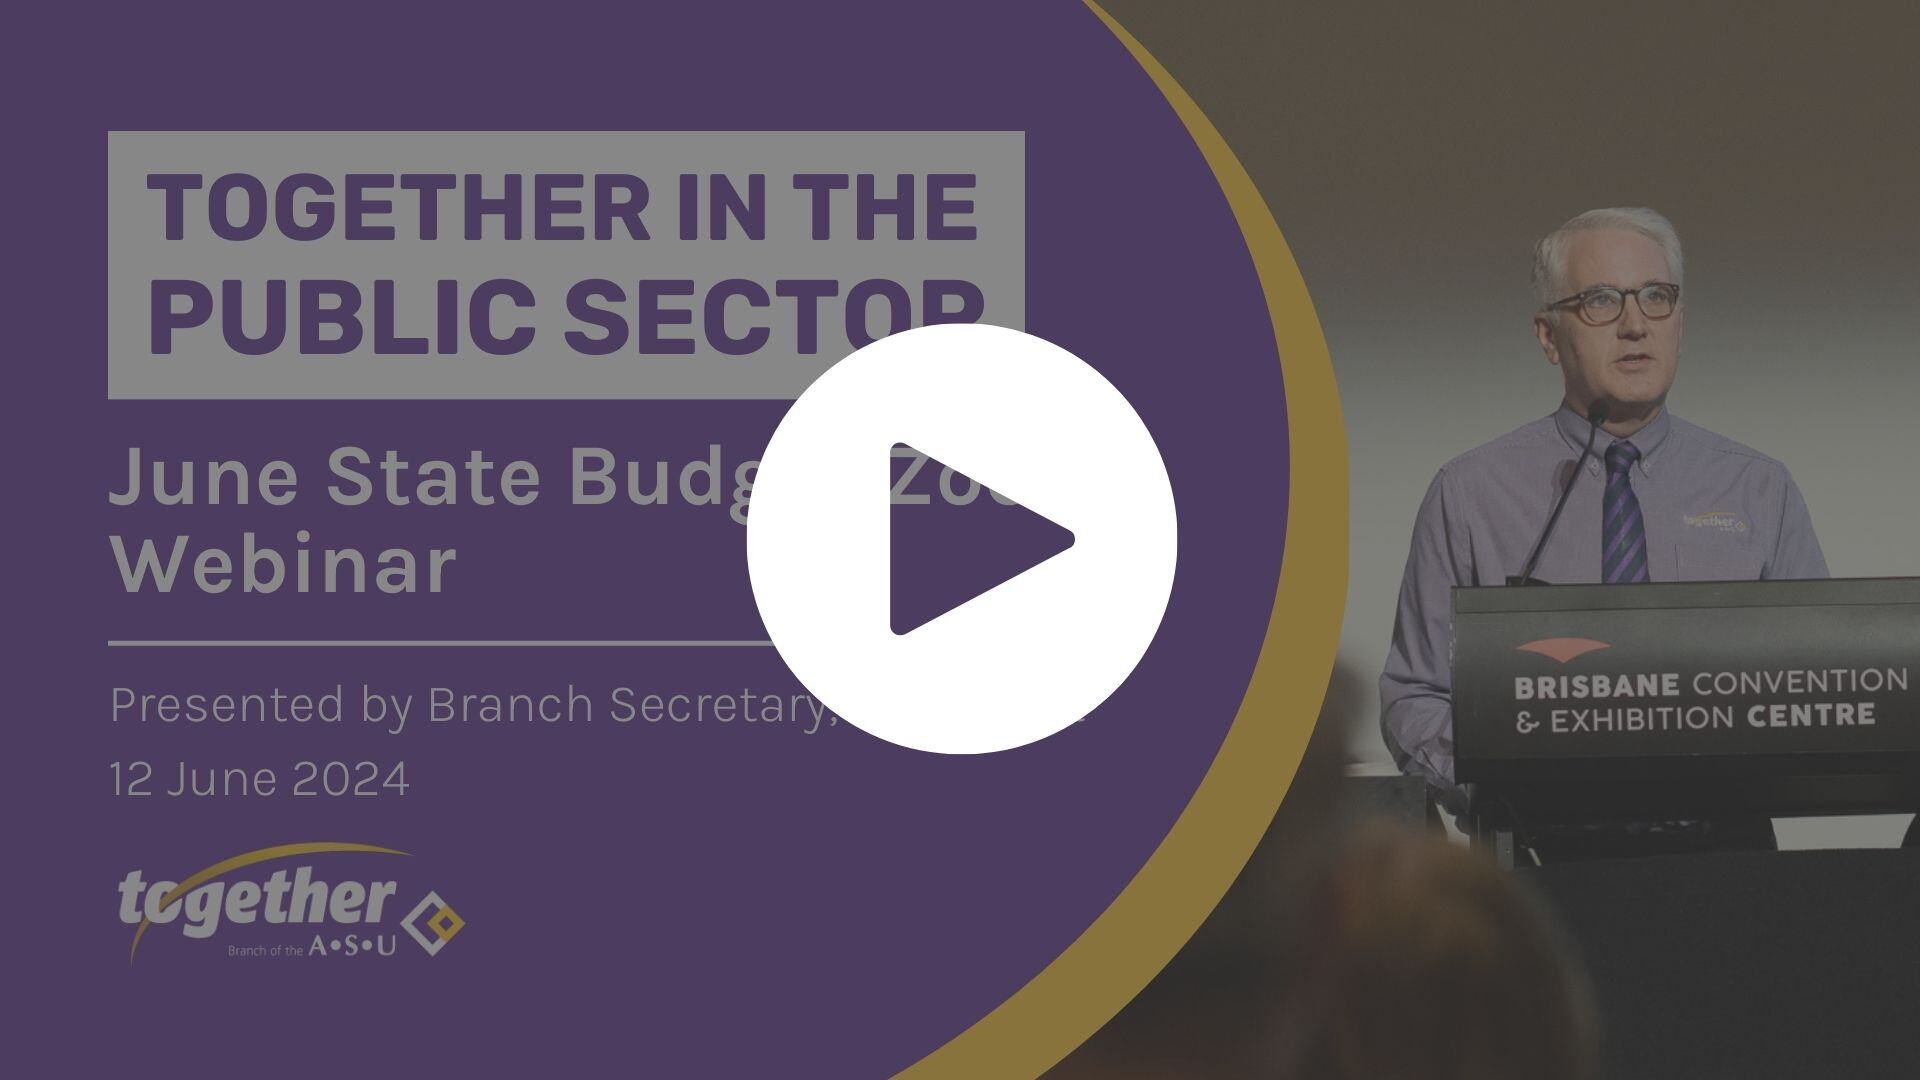 VIDEO THUMBNAIL - PUBLIC SECTOR - STATE BUDGET JUNE - THUMBNAIL - PLAY BUTTON